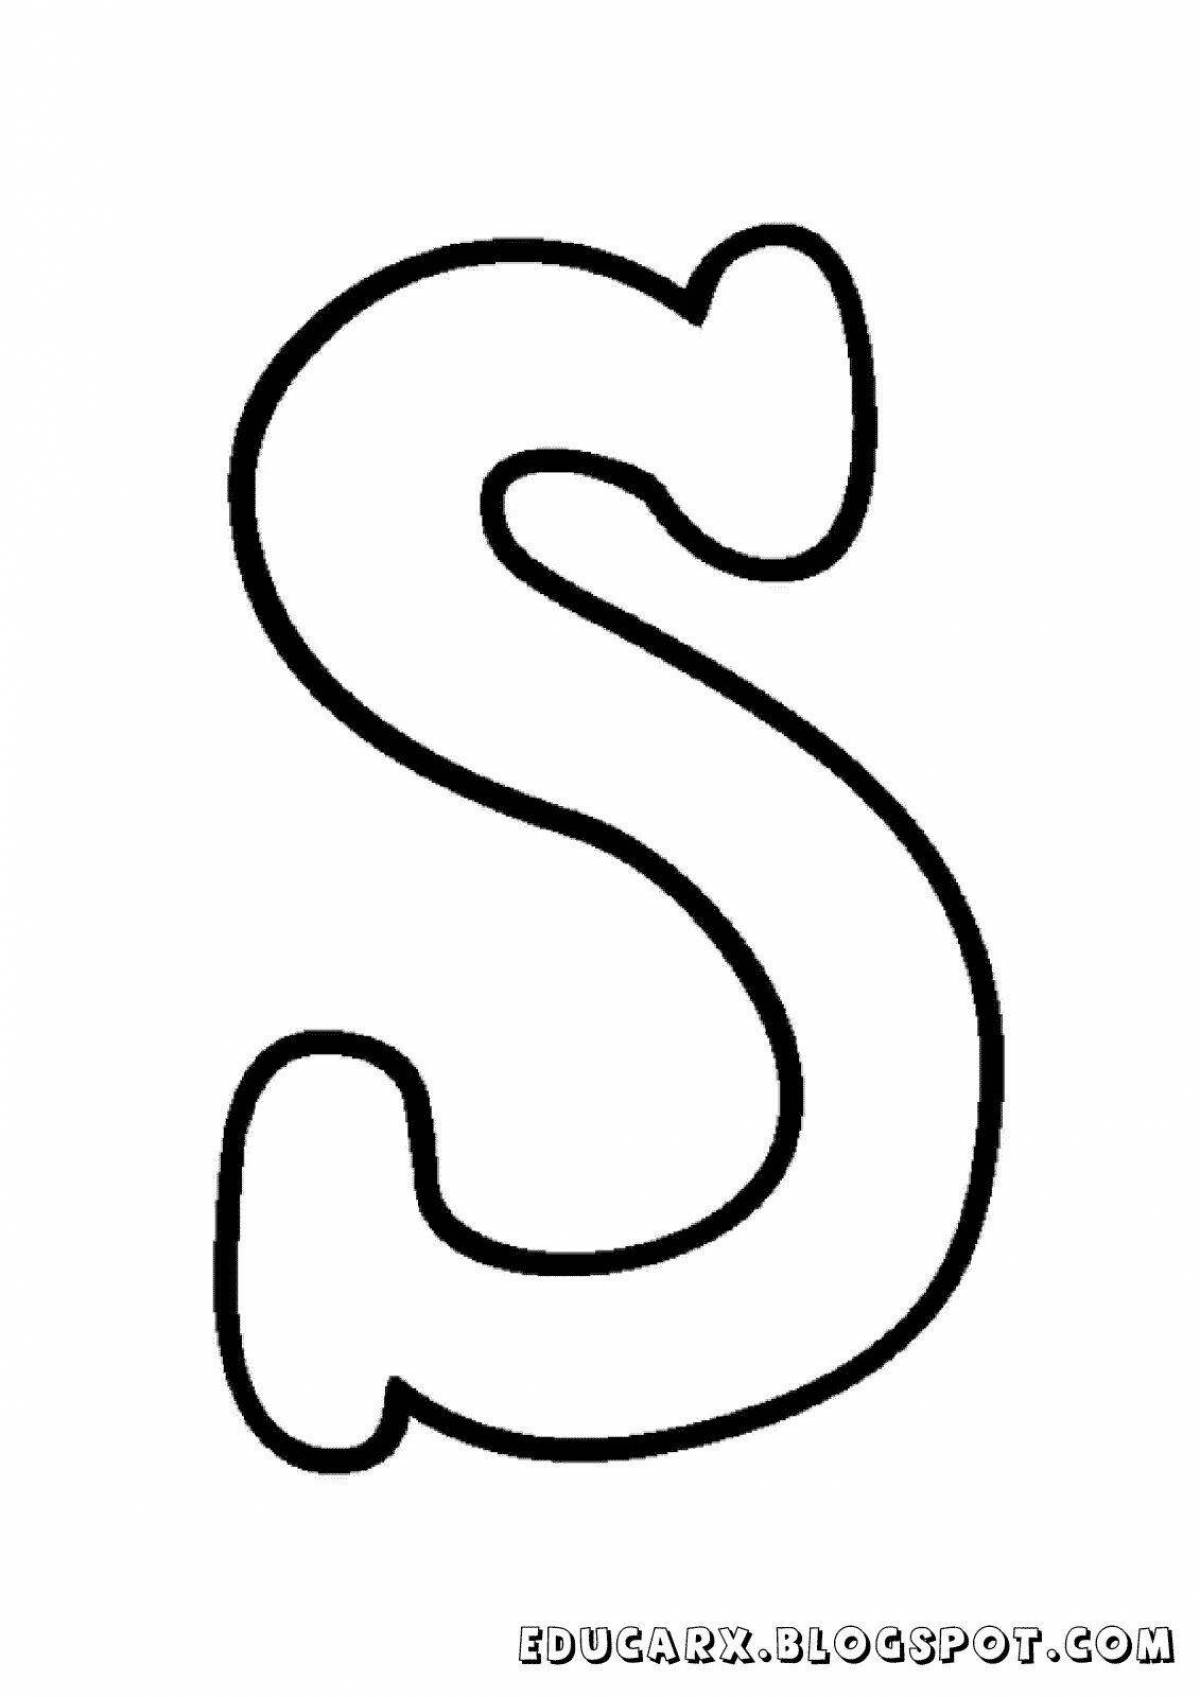 Coloring page festive letter s